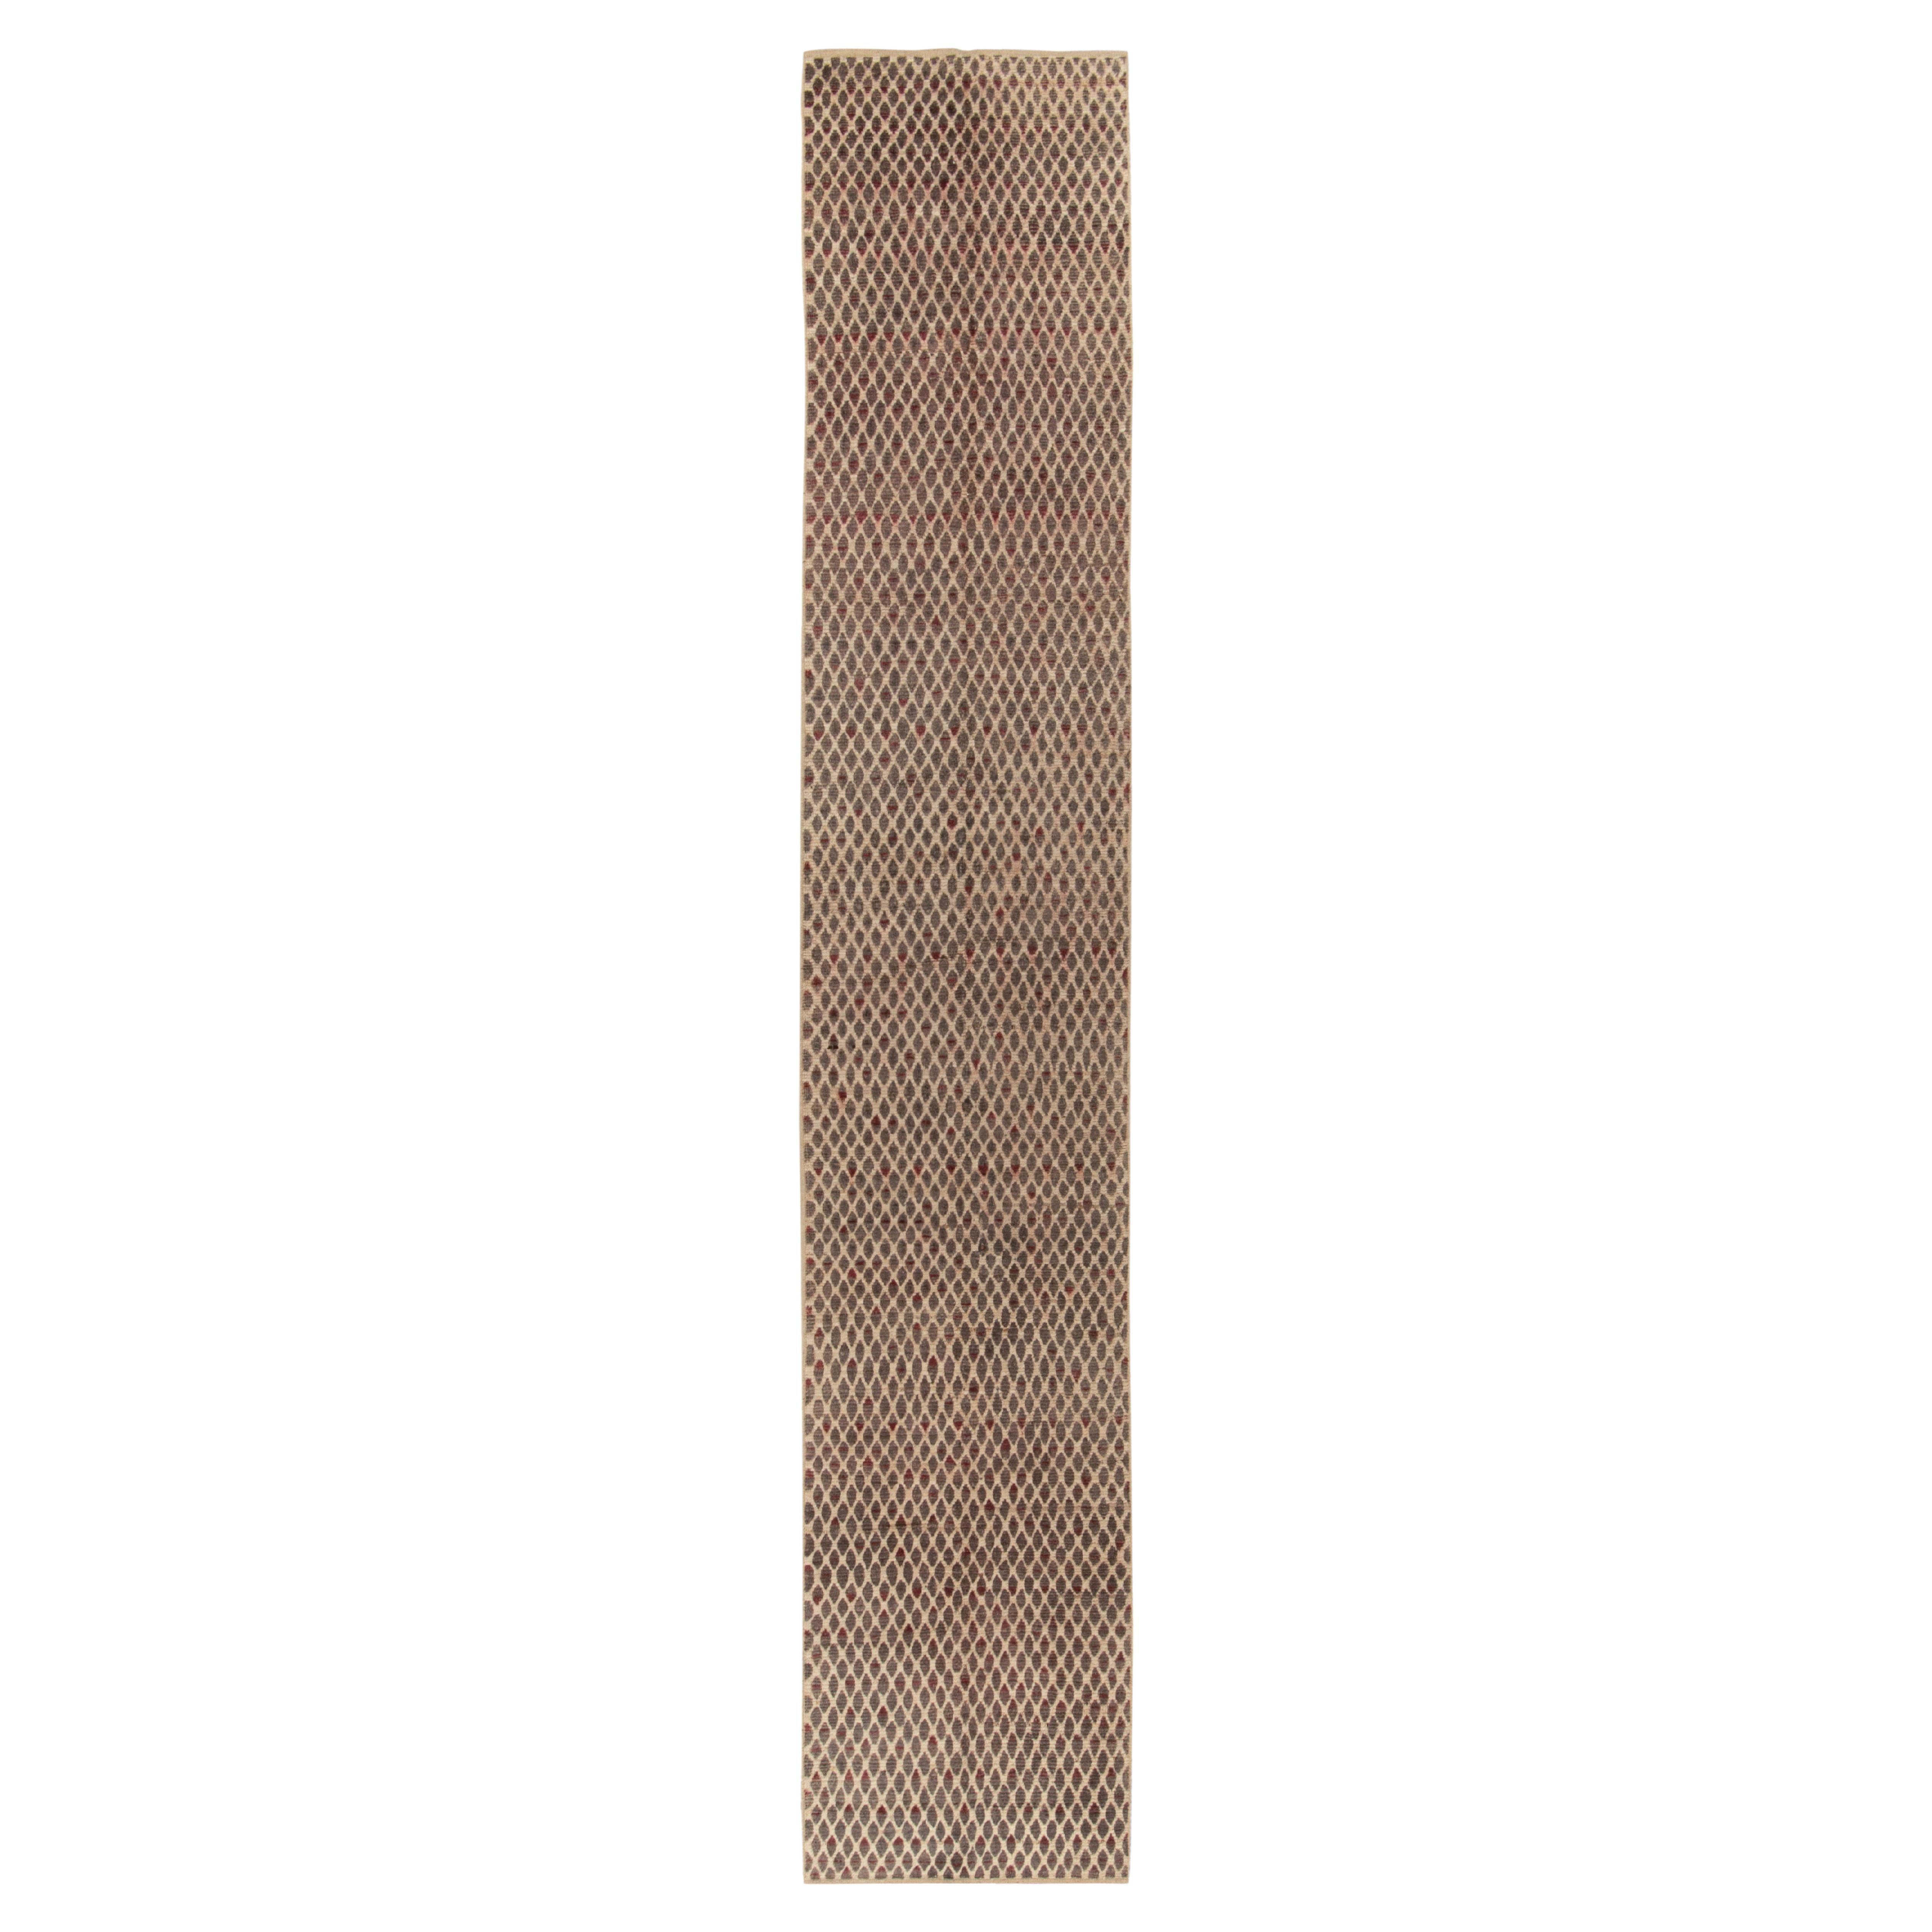 Rug & Kilim's Contemporary Moroccan Style Runner in Beige-Brown, Grey & Red